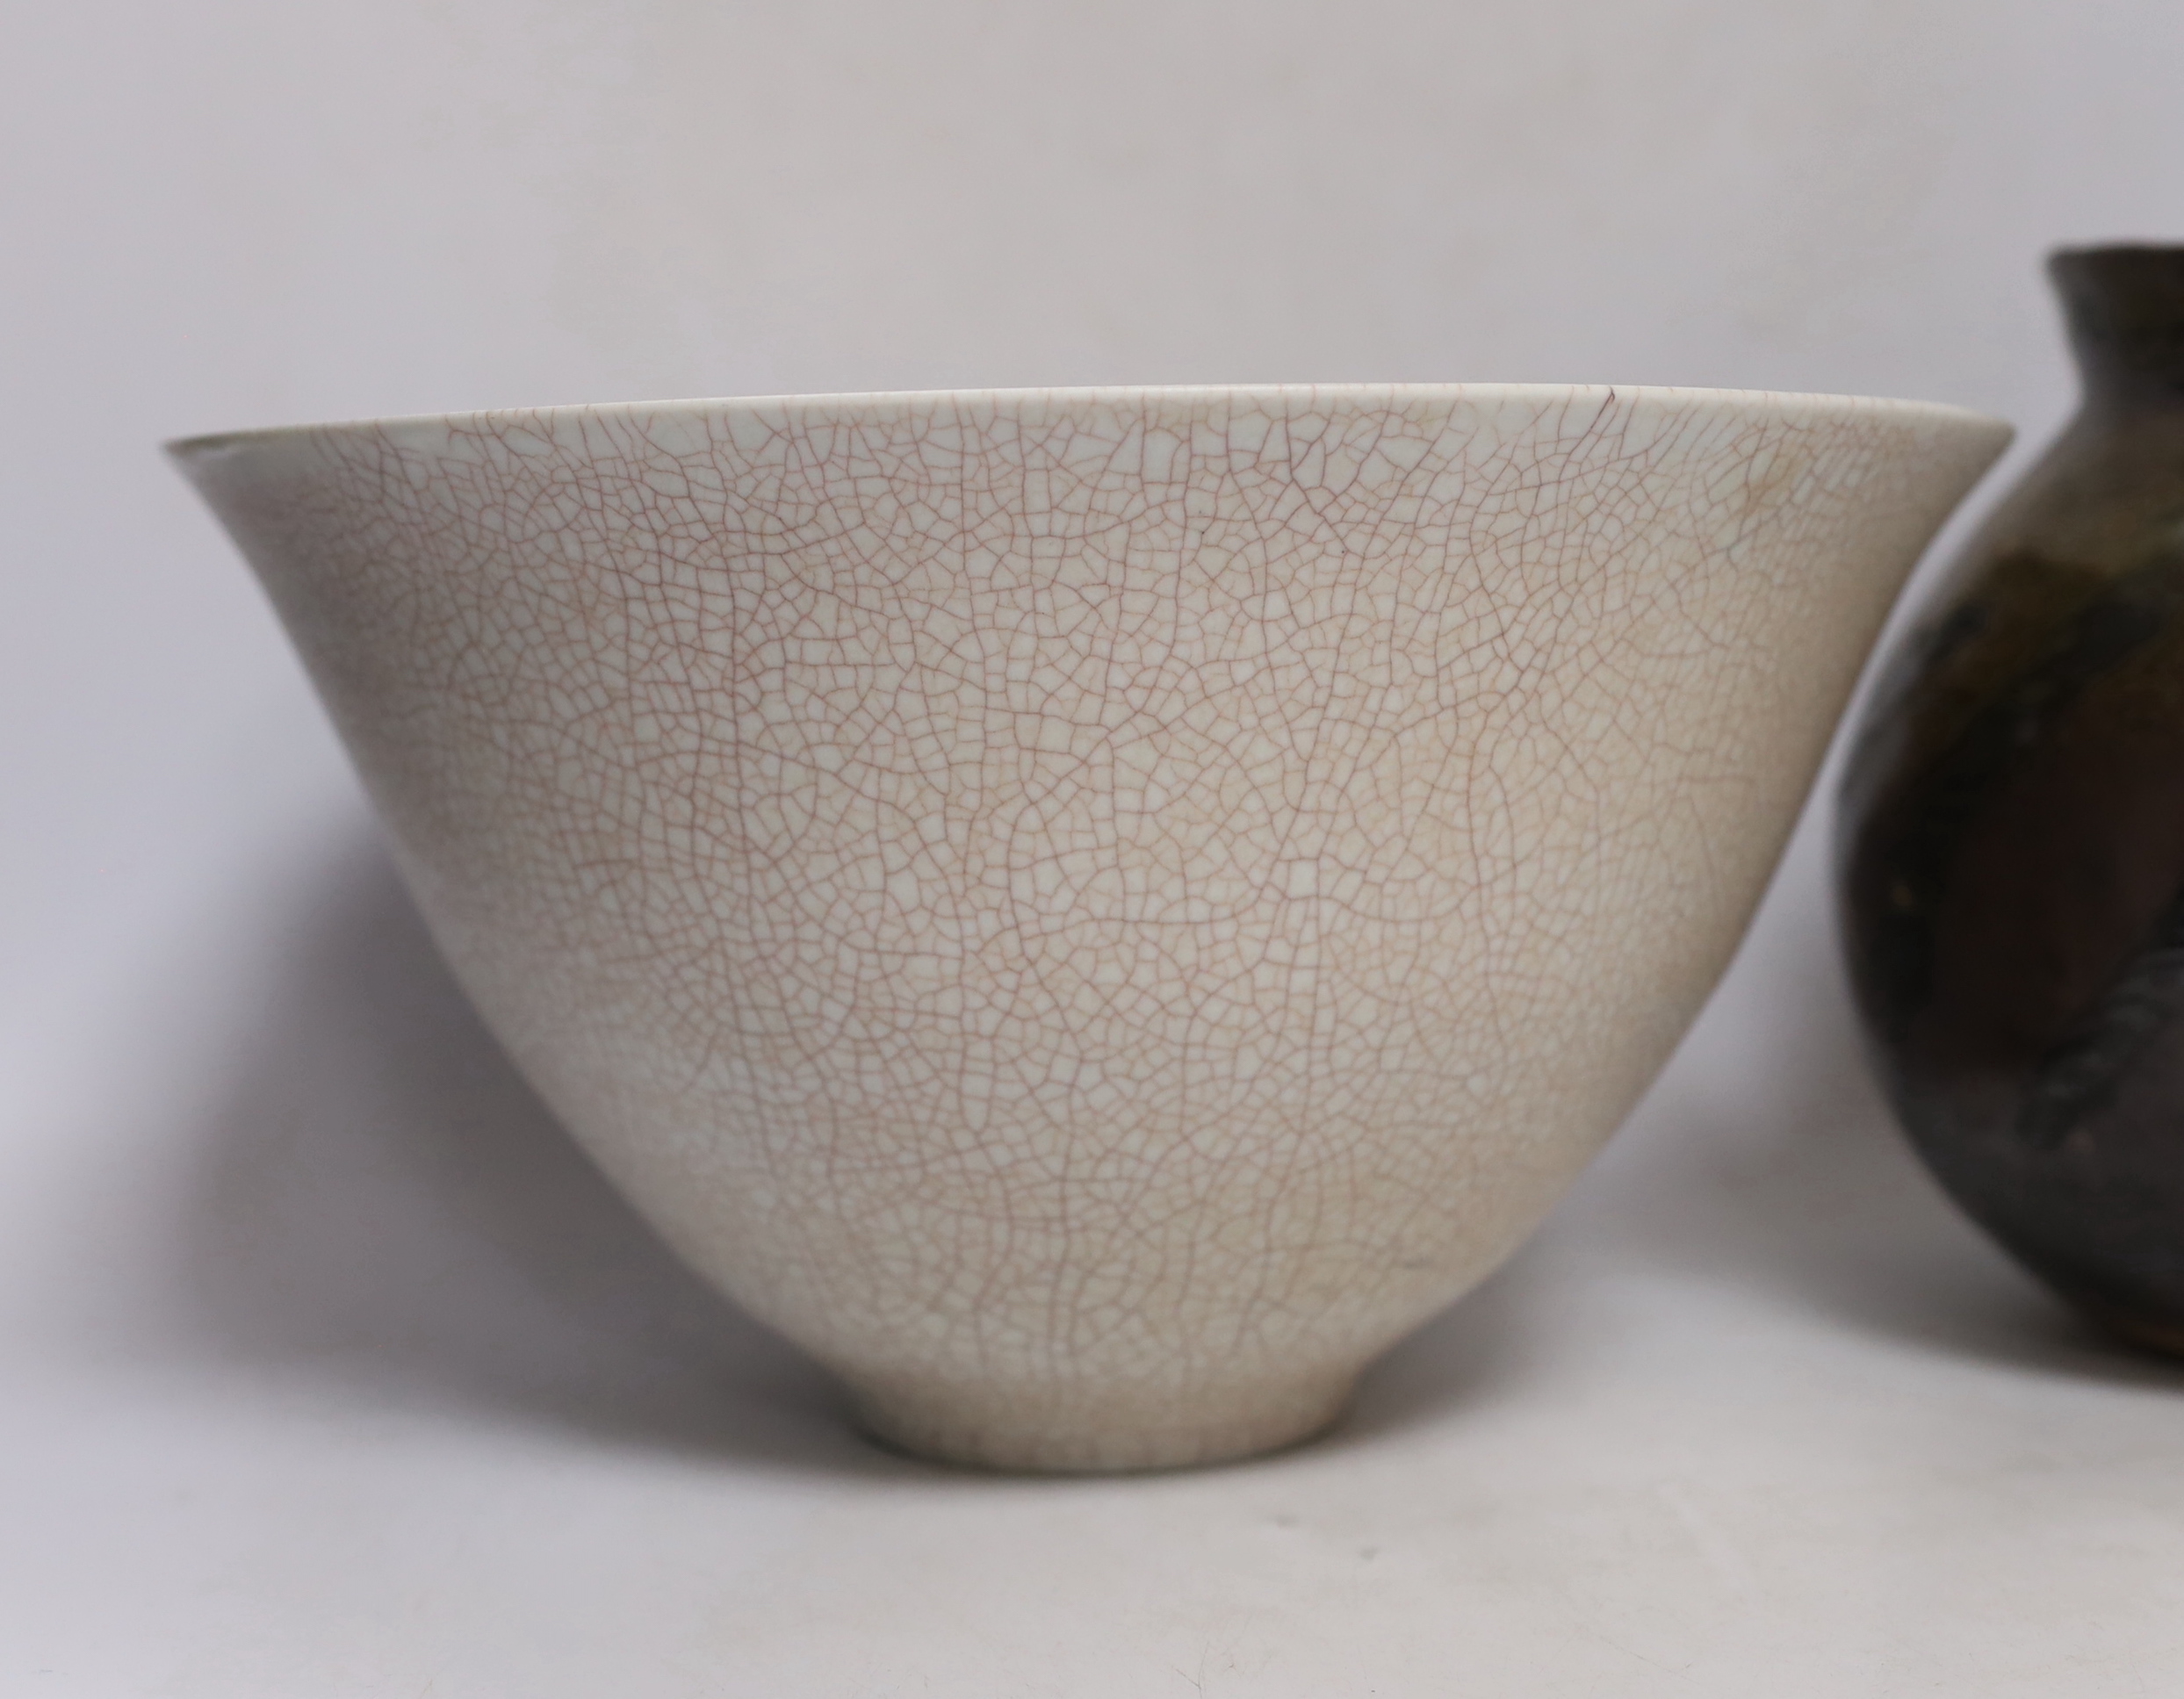 Tim Andrews, a bowl and a studio pottery crackleware vase, tallest 19cm high